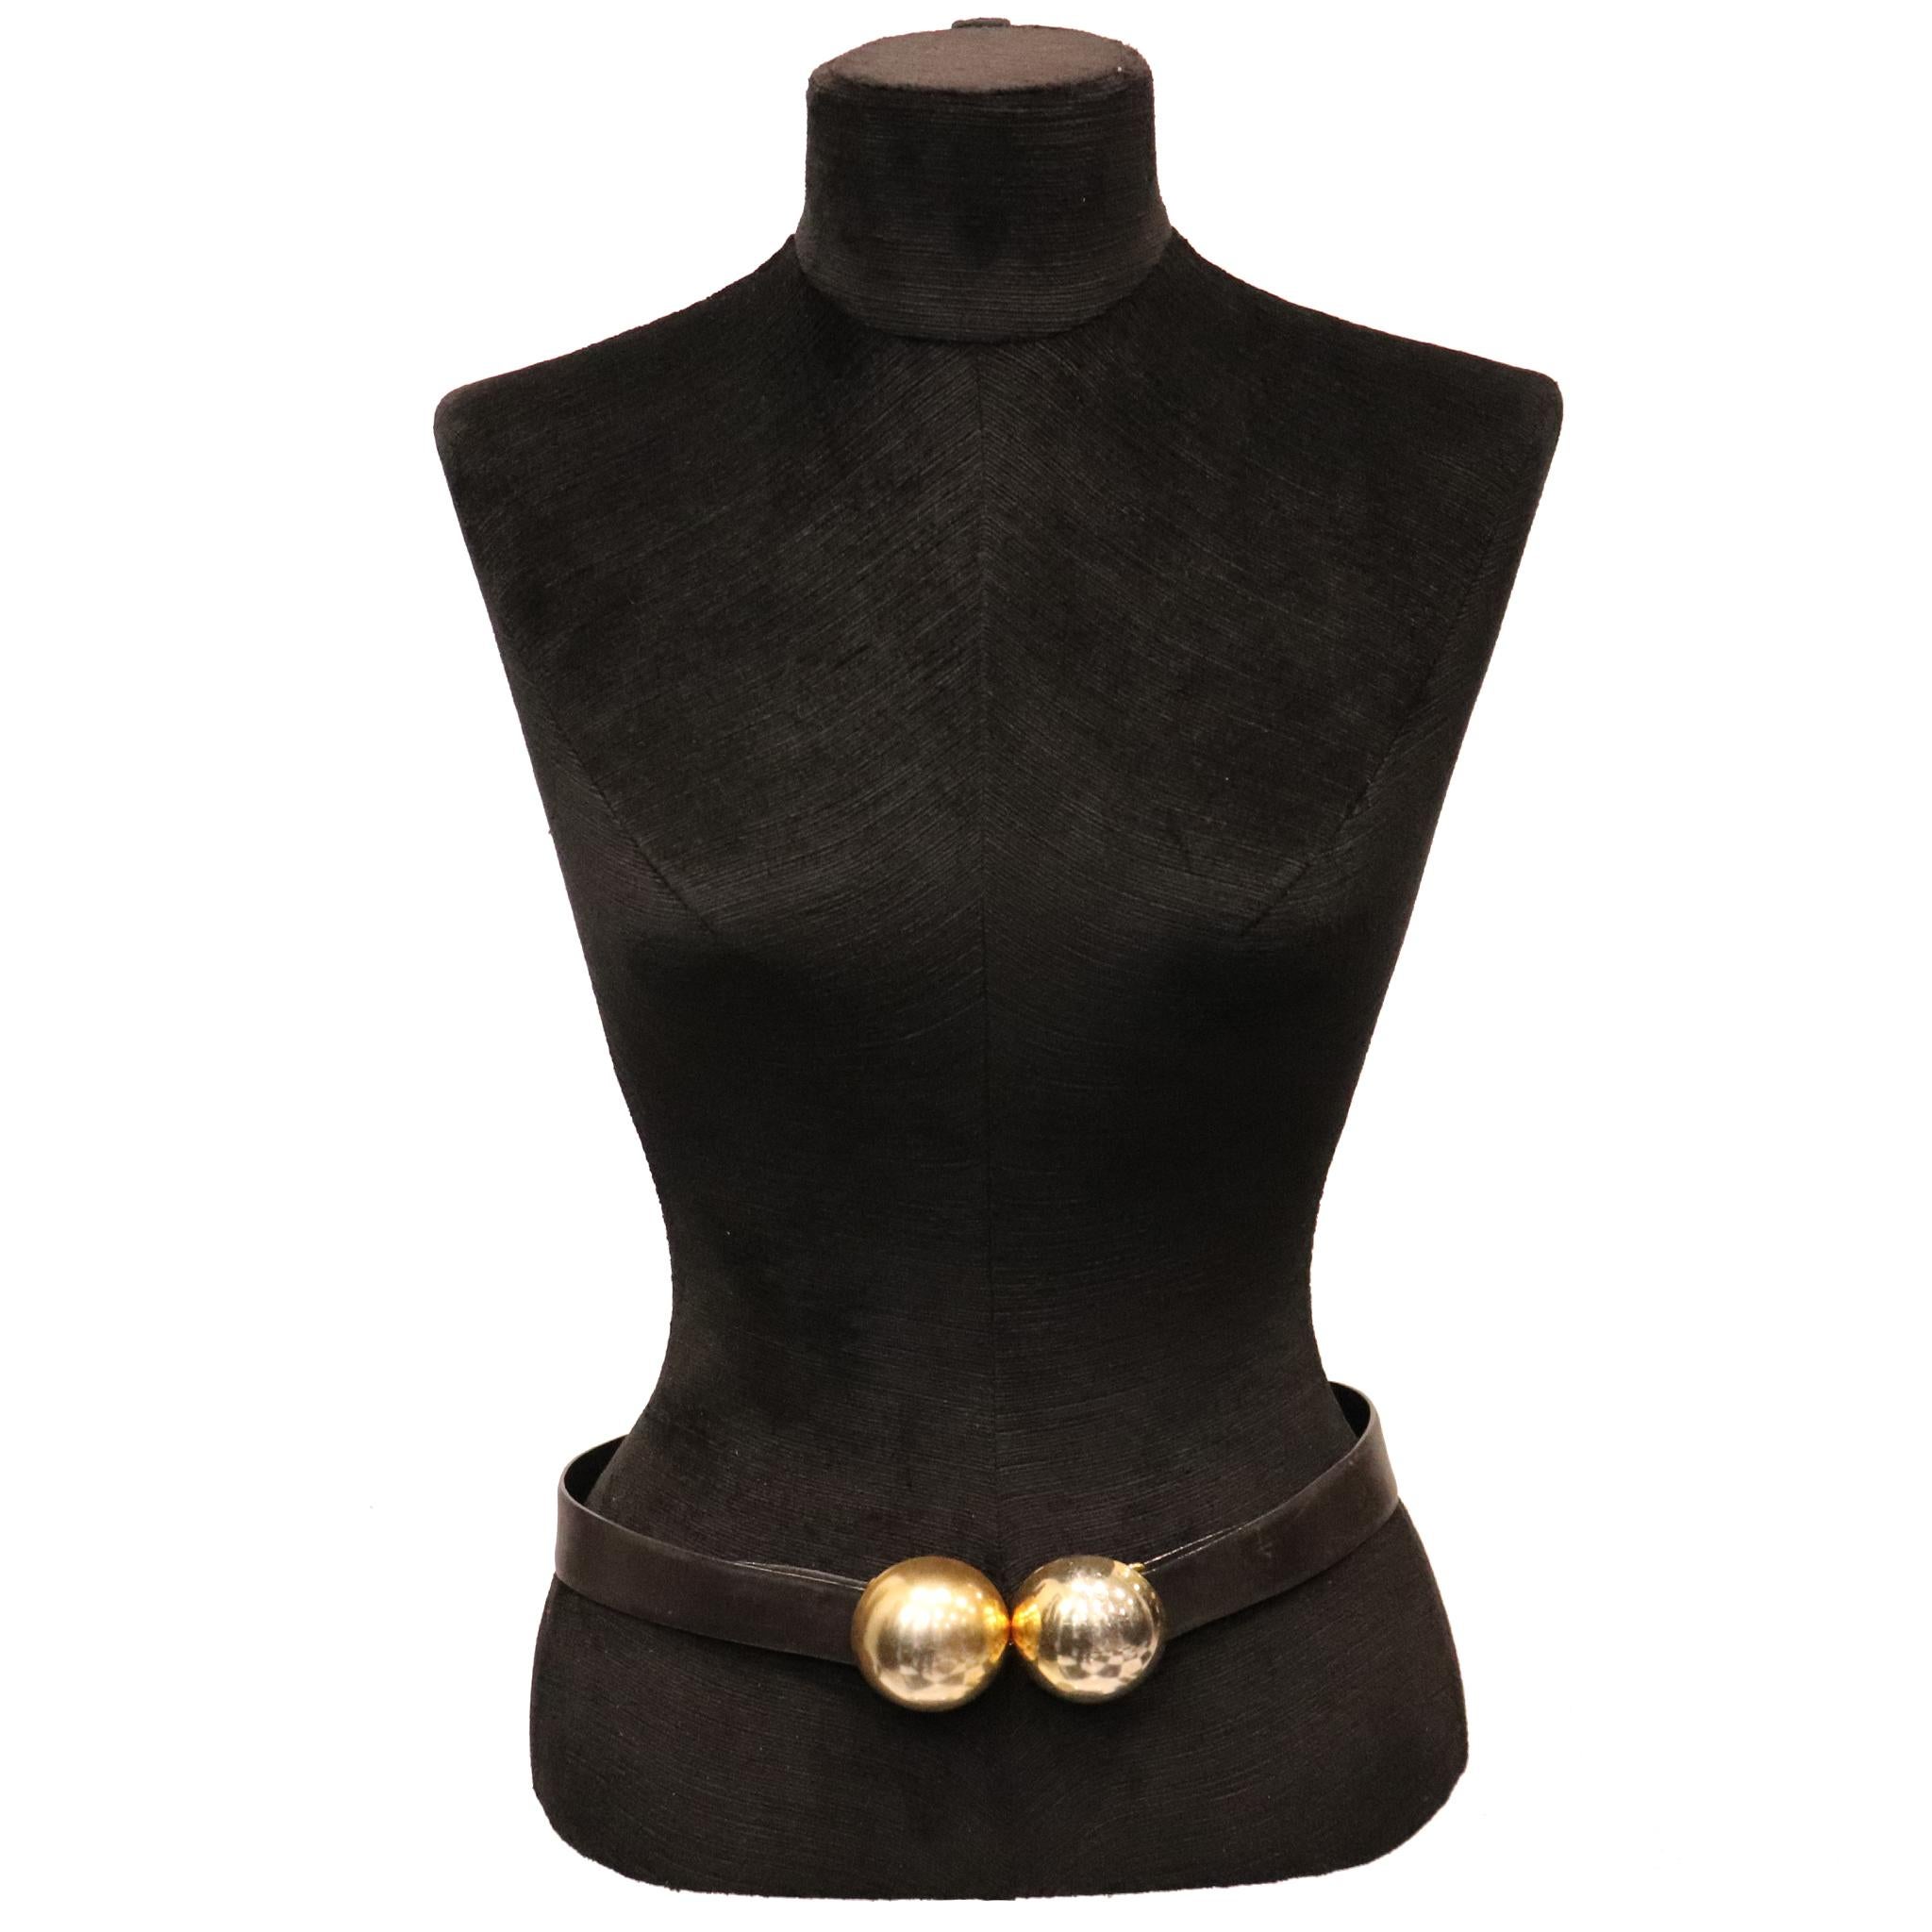 Donna Karan Black Leather Belt W/ 2 Large Gold Balls Closure. From 1990s is in excellent condition 

Measurements: 

Length - 30 inches
Width - 1.3 inches 